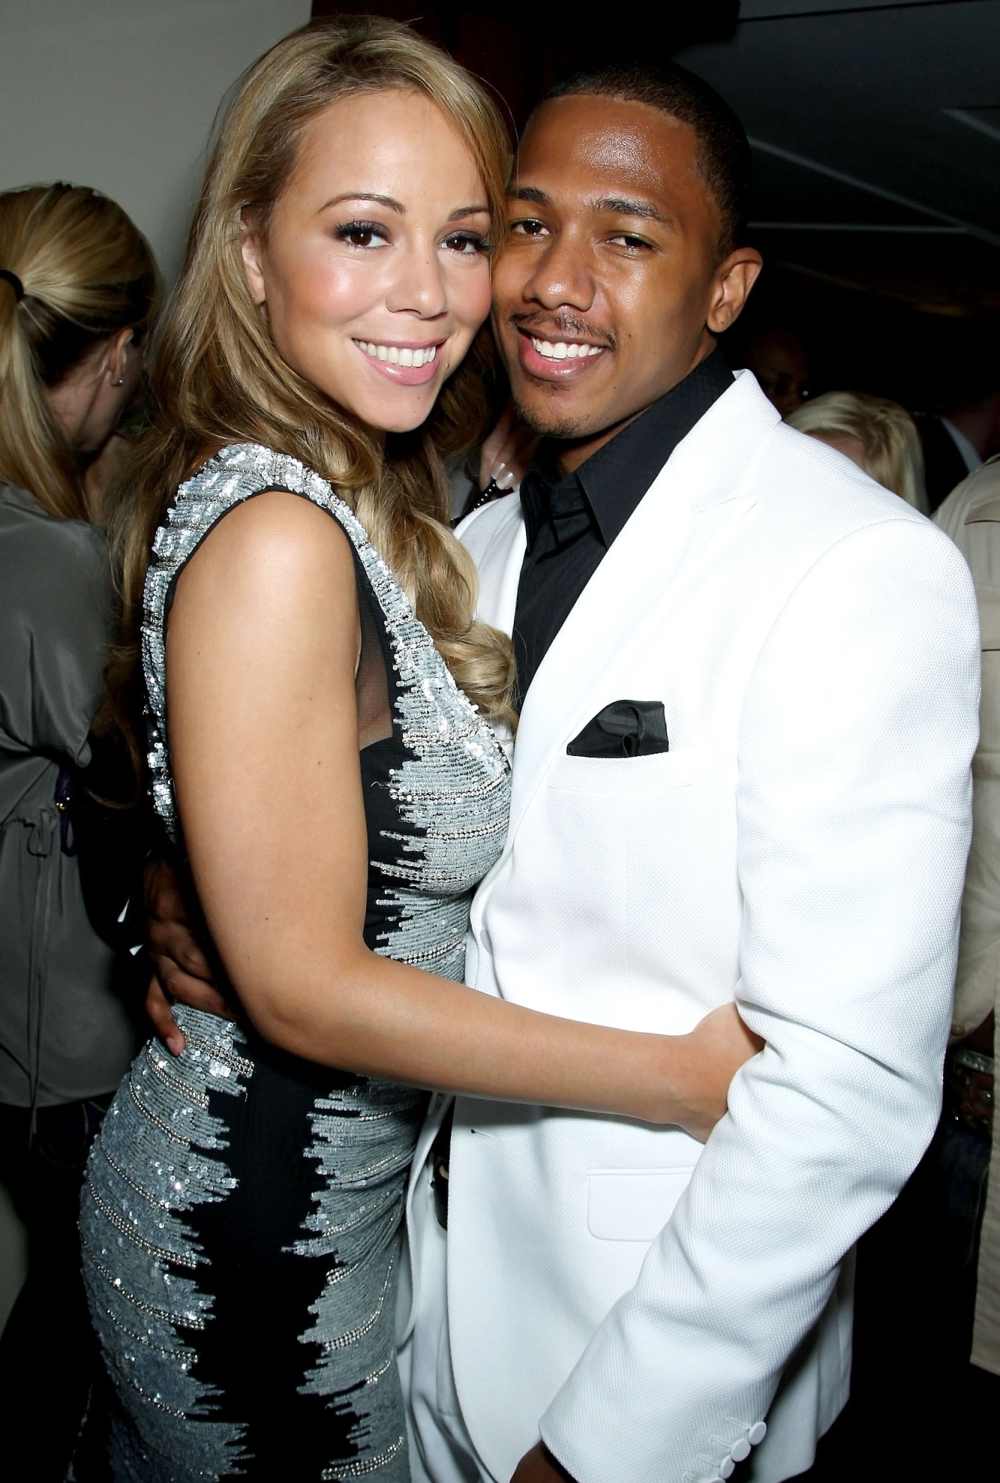 Mariah Carey Nick Cannon The Way They Were